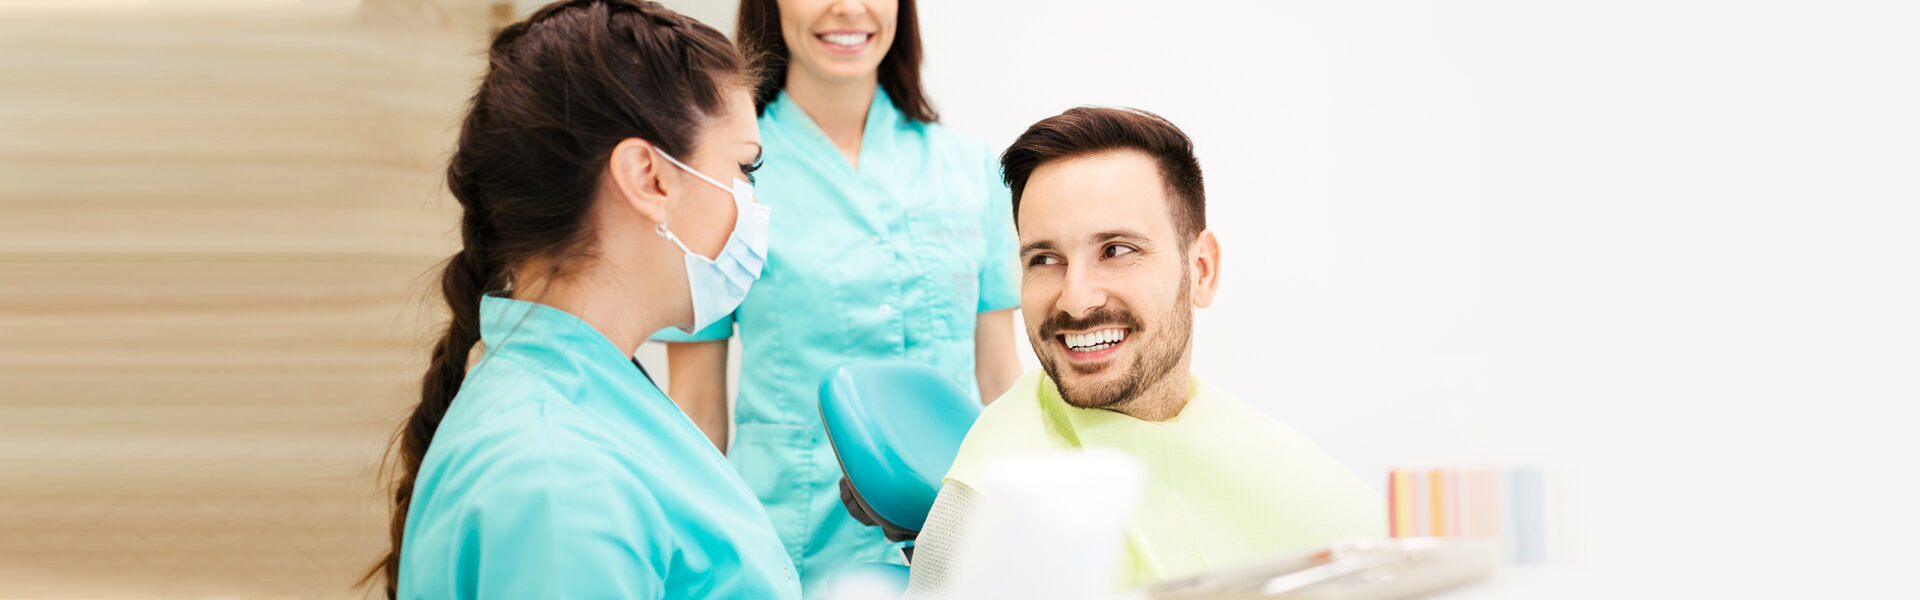 Root Canal Therapy in Middleburg, PA 